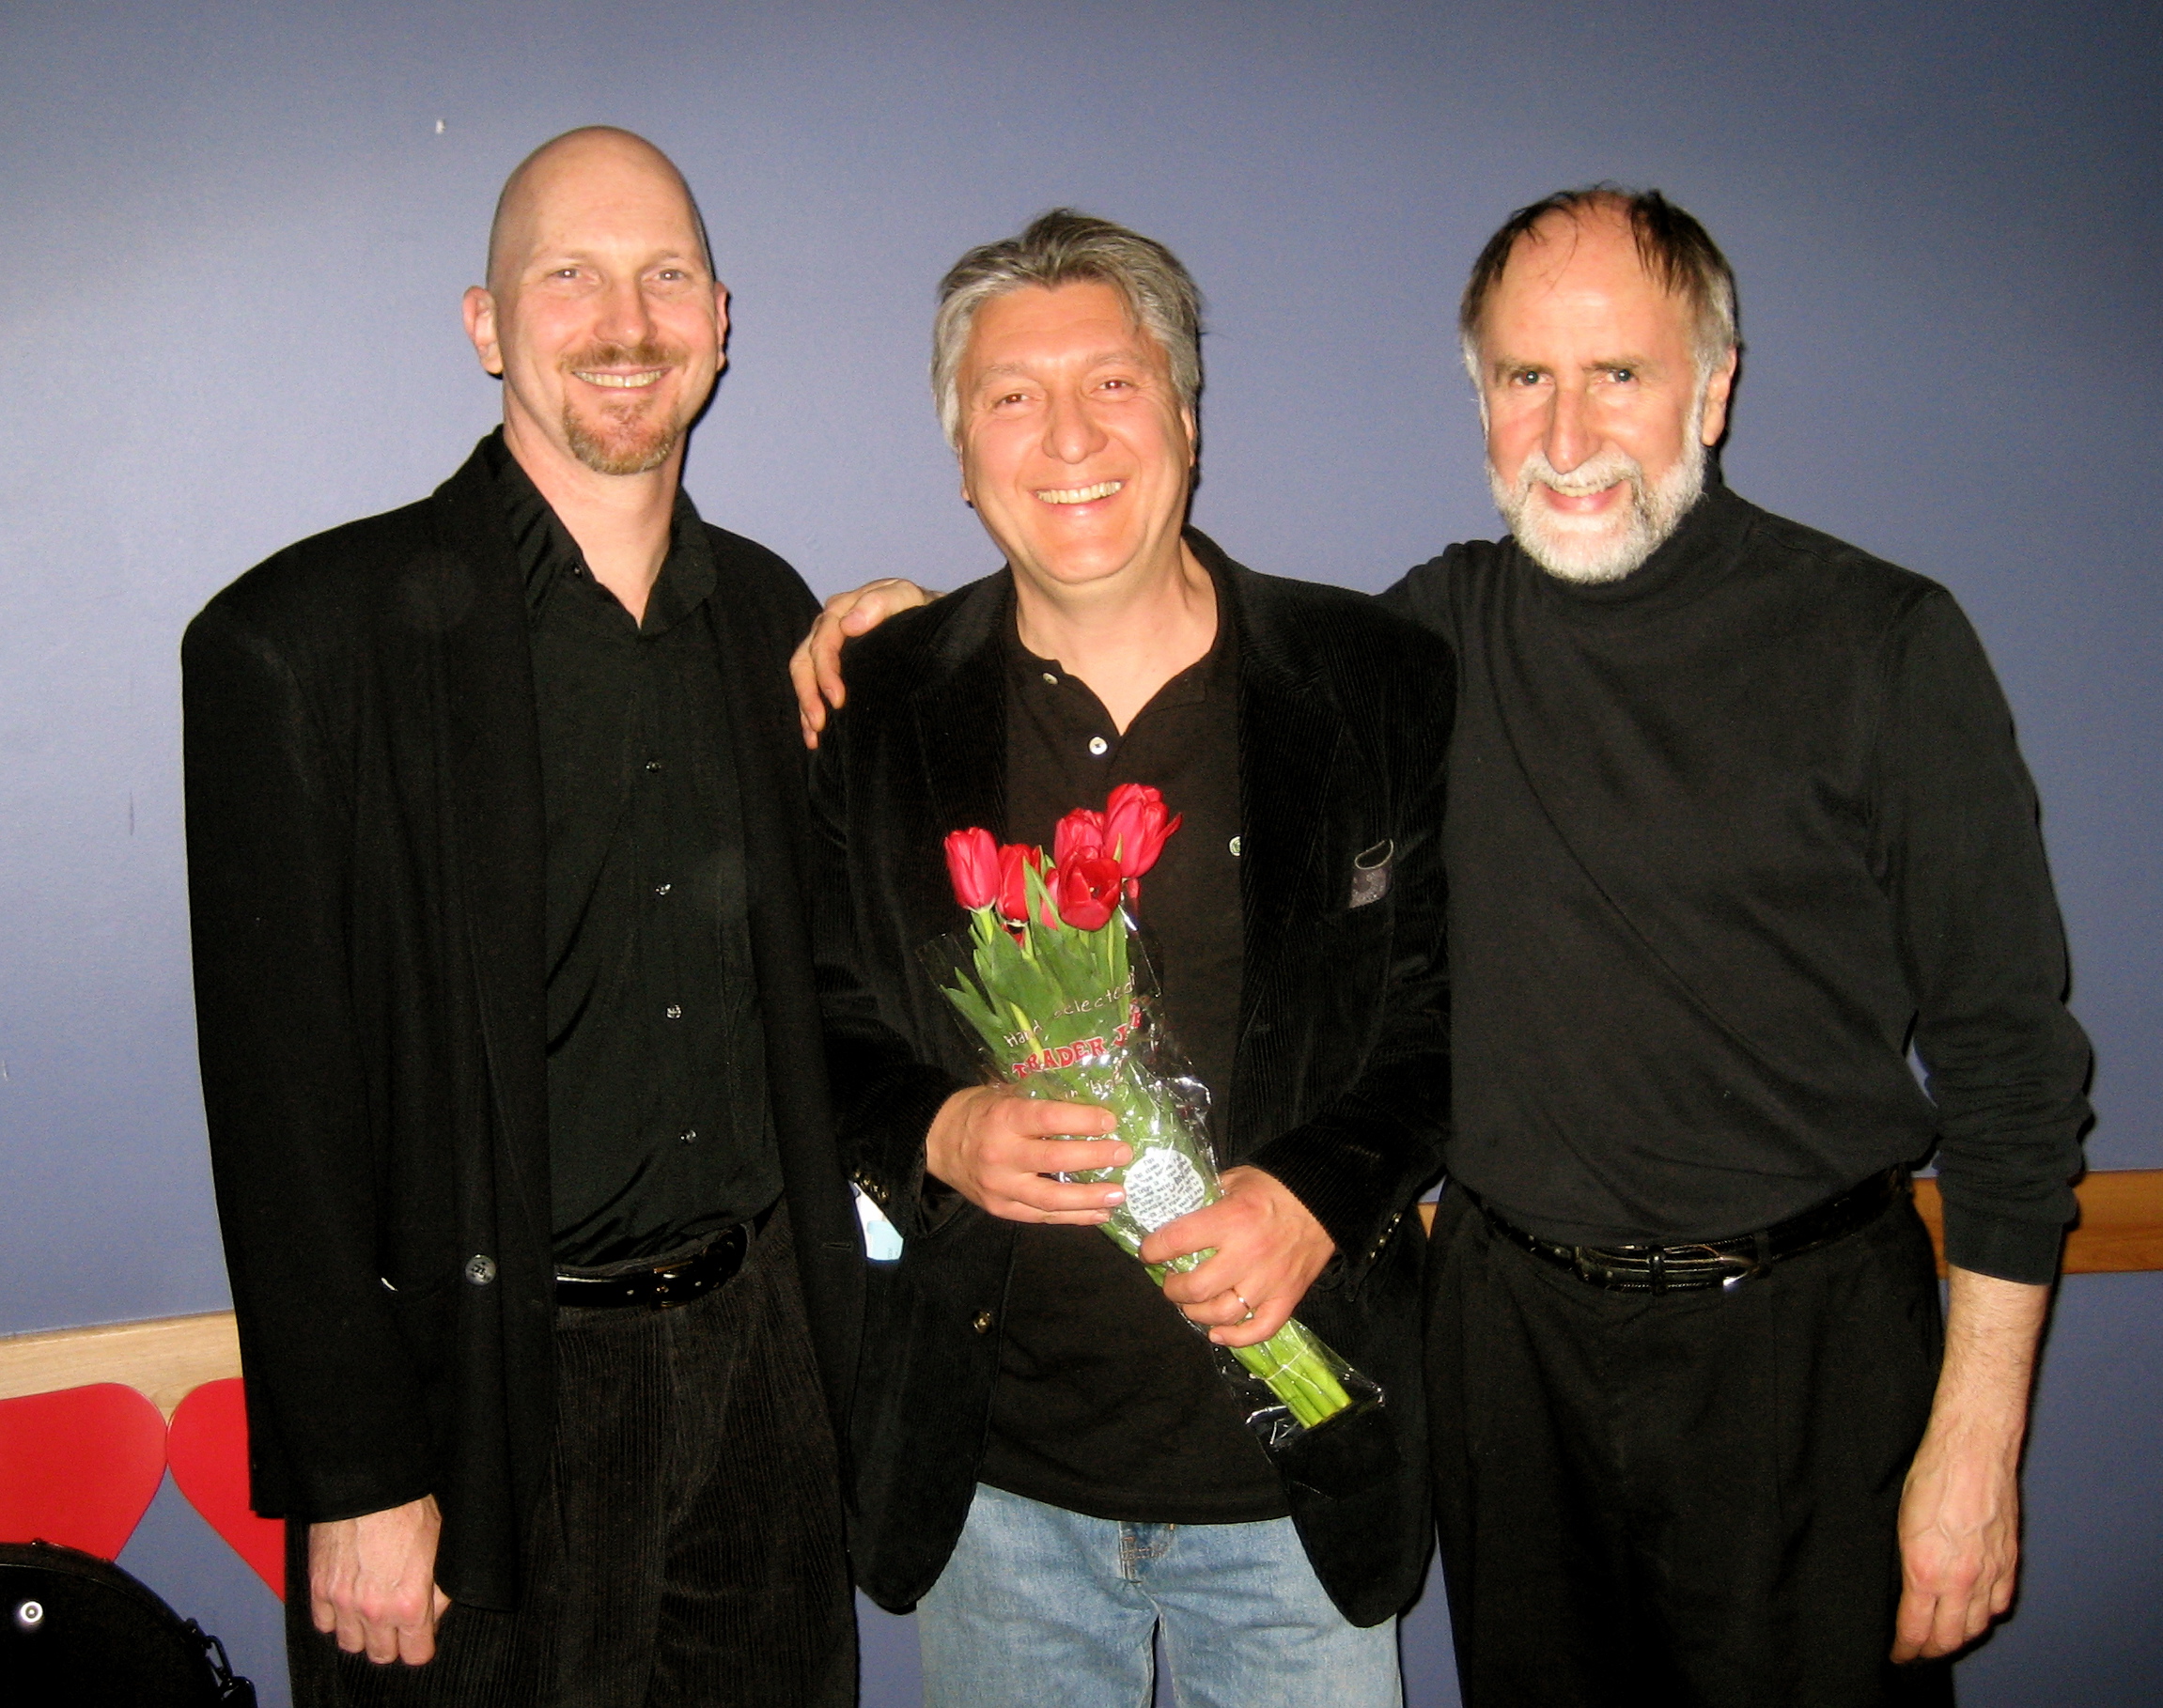 Piano Concerto premier with Eugene Friezen (conductor) and Tim Ray (pianist)